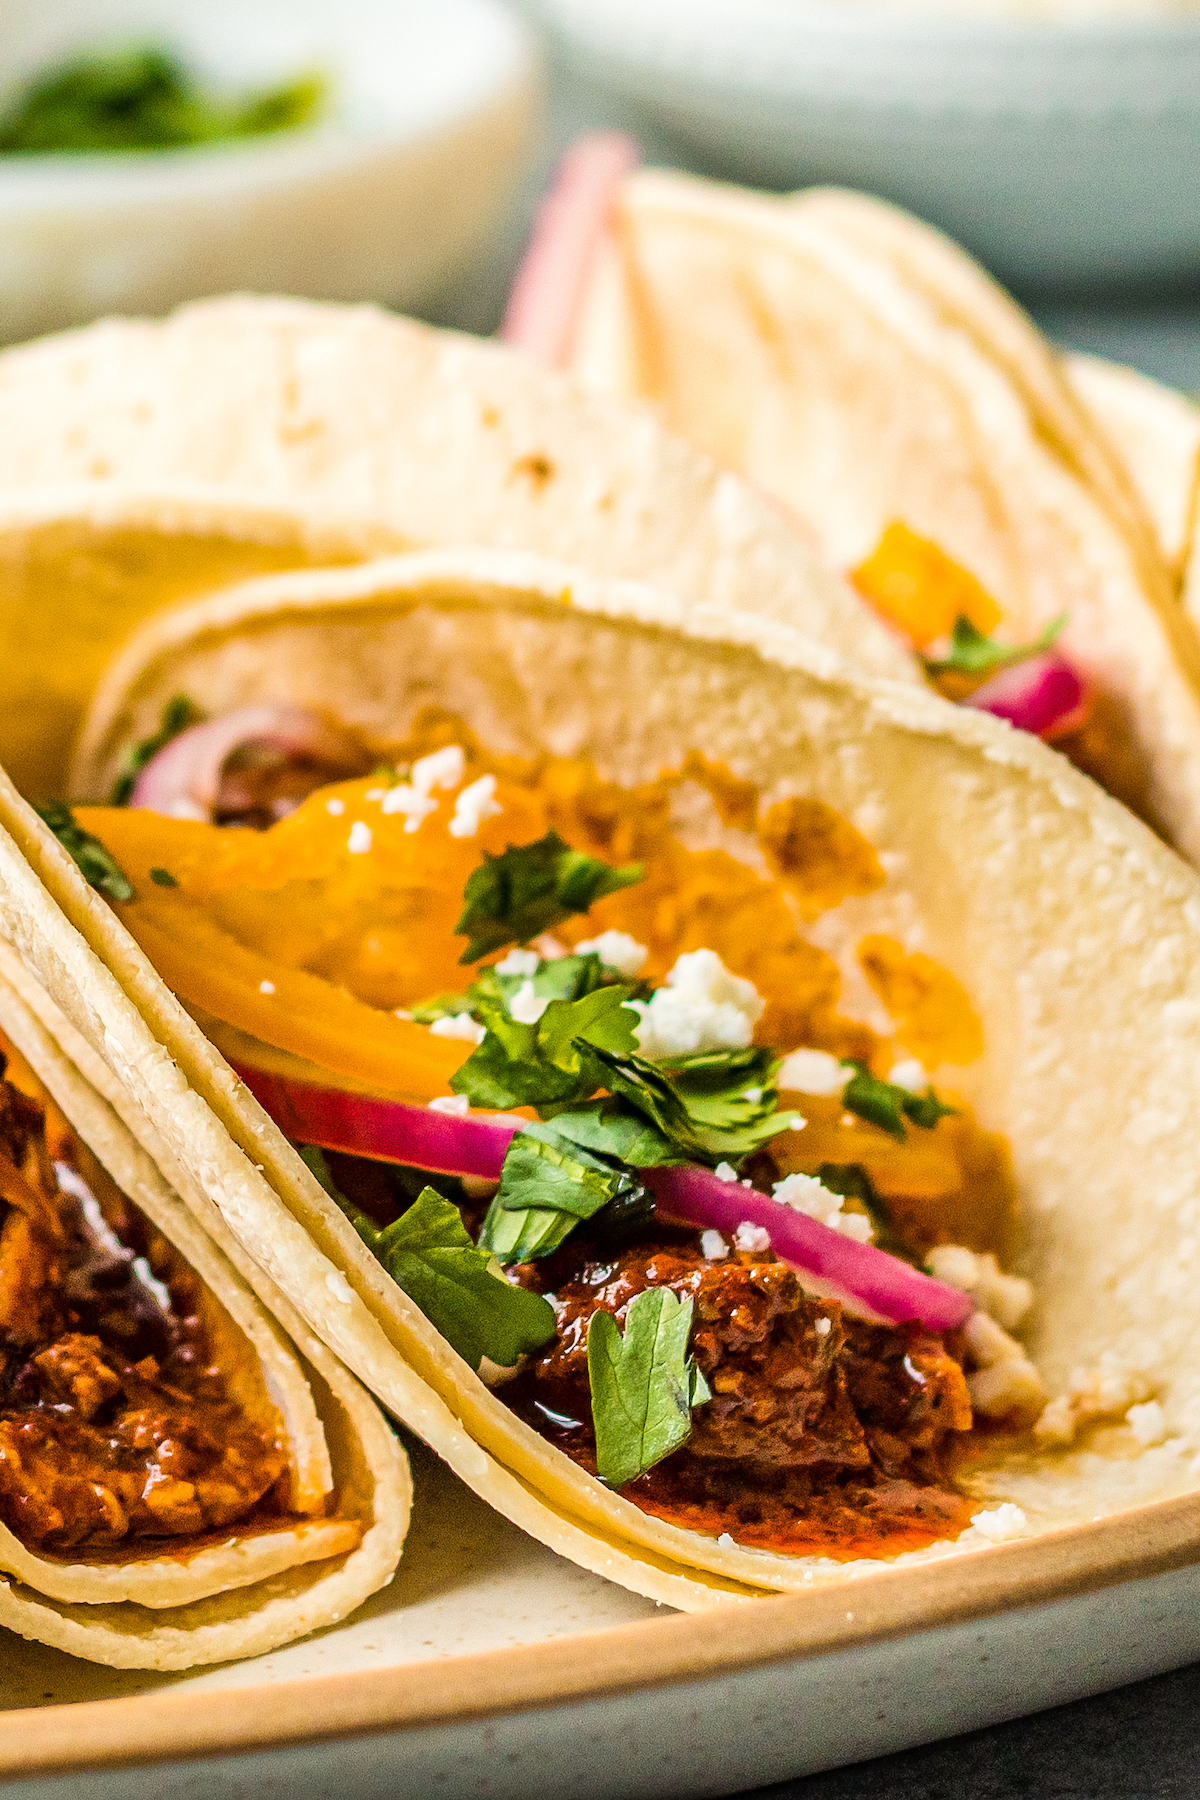 Corn tortilla tacos filled with pork, red onions, and herbs